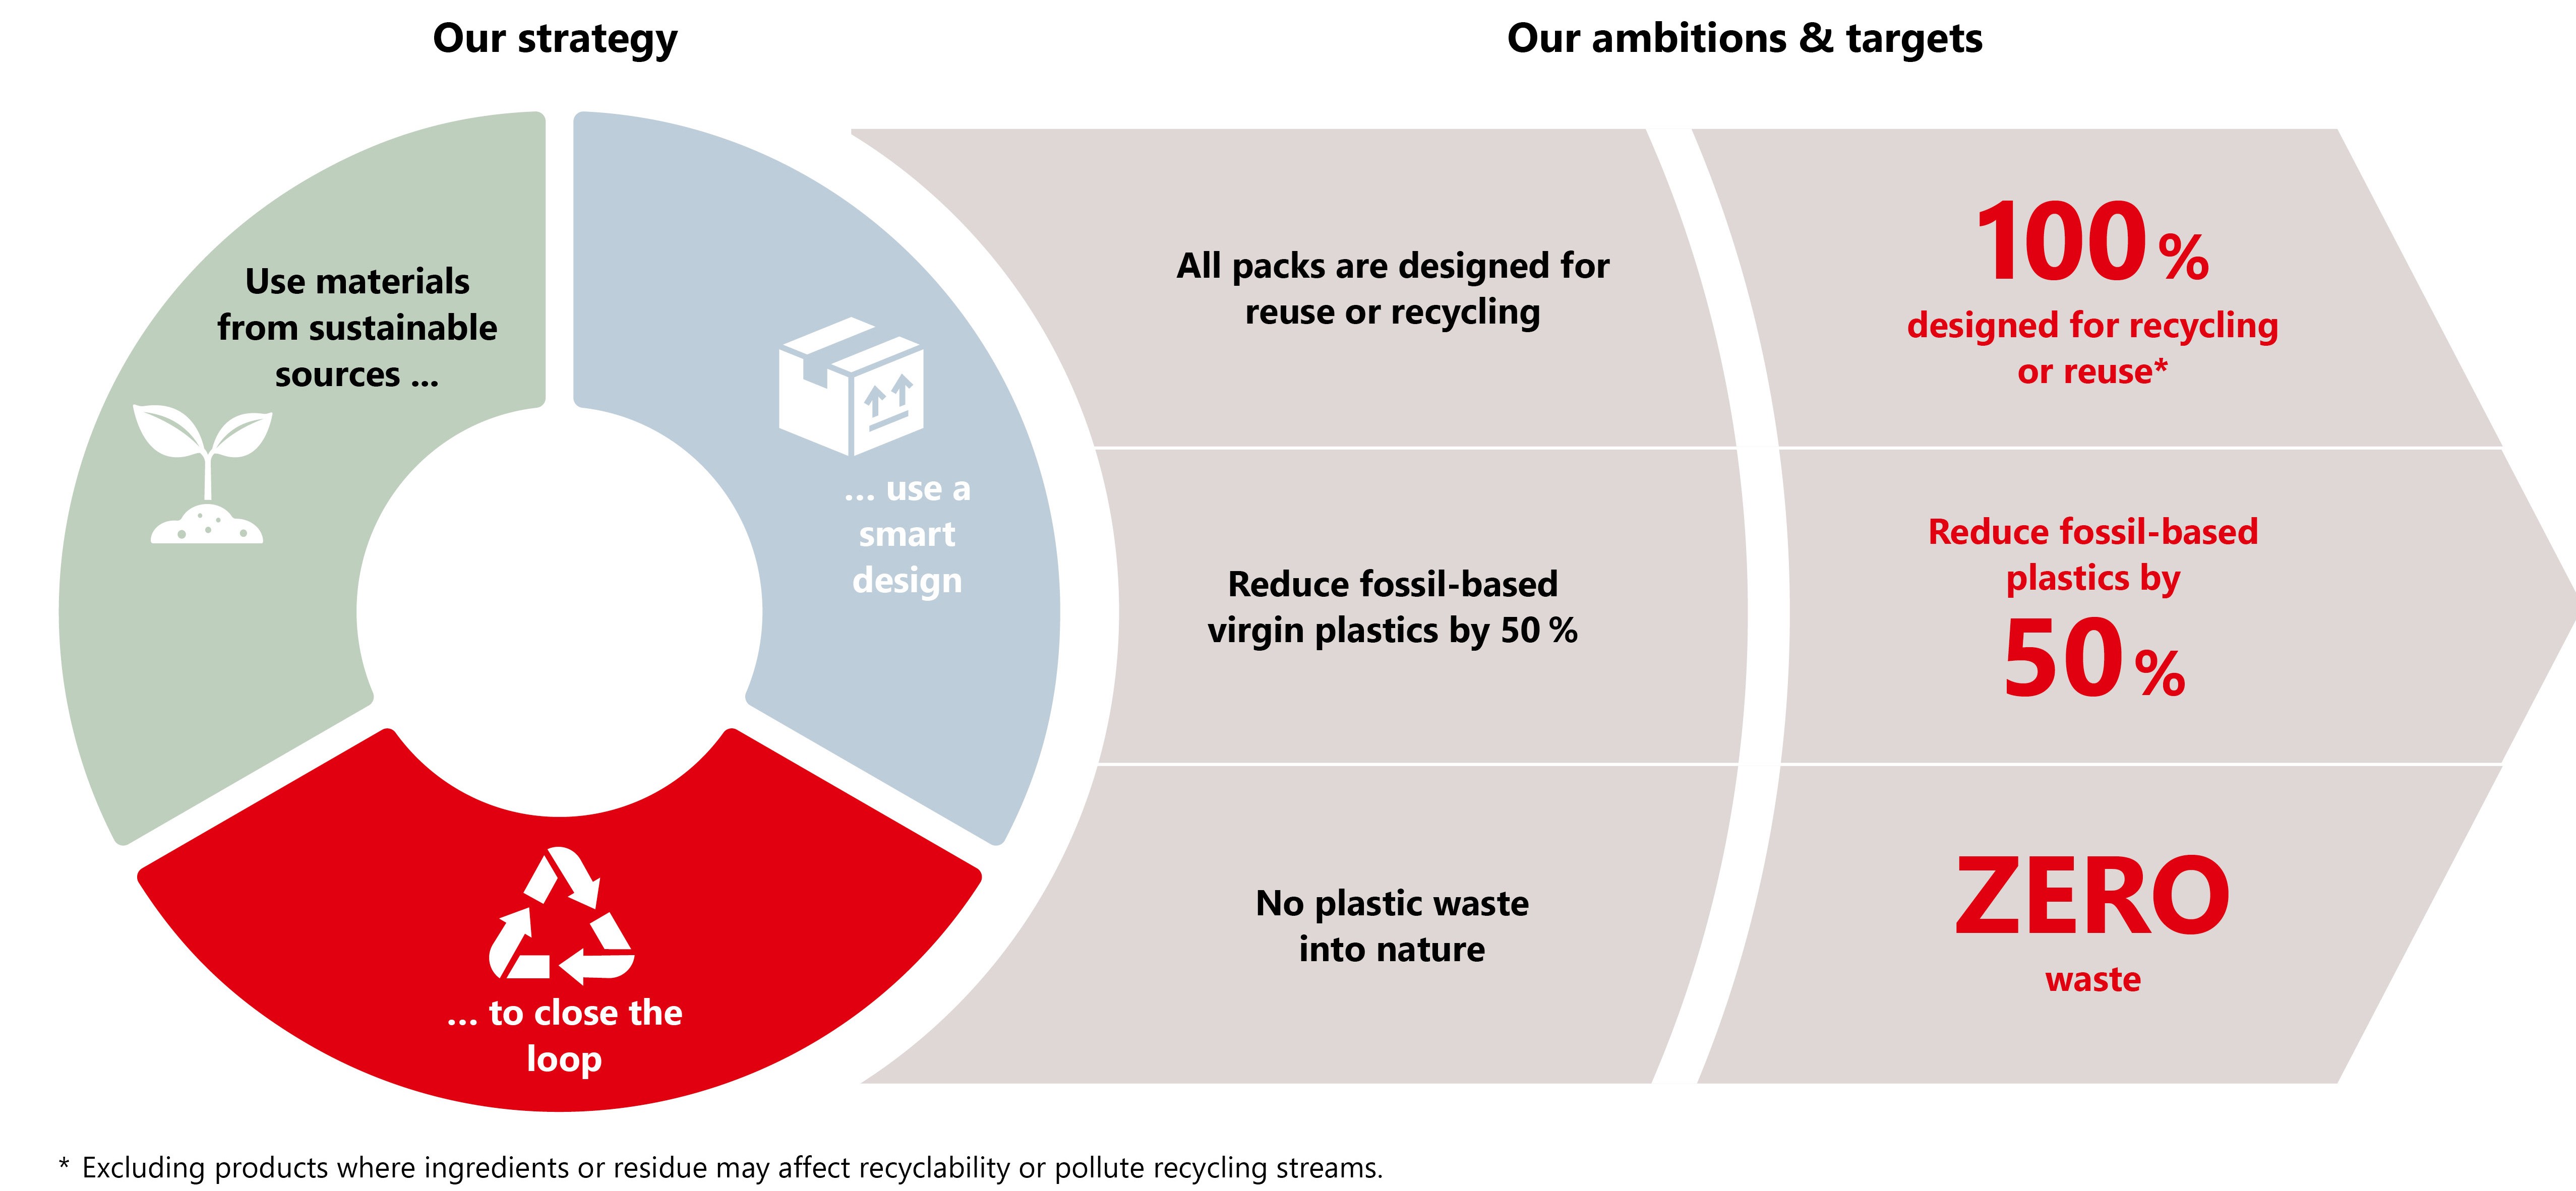 Overview of the strategy, ambitions and targets on the topic of packaging